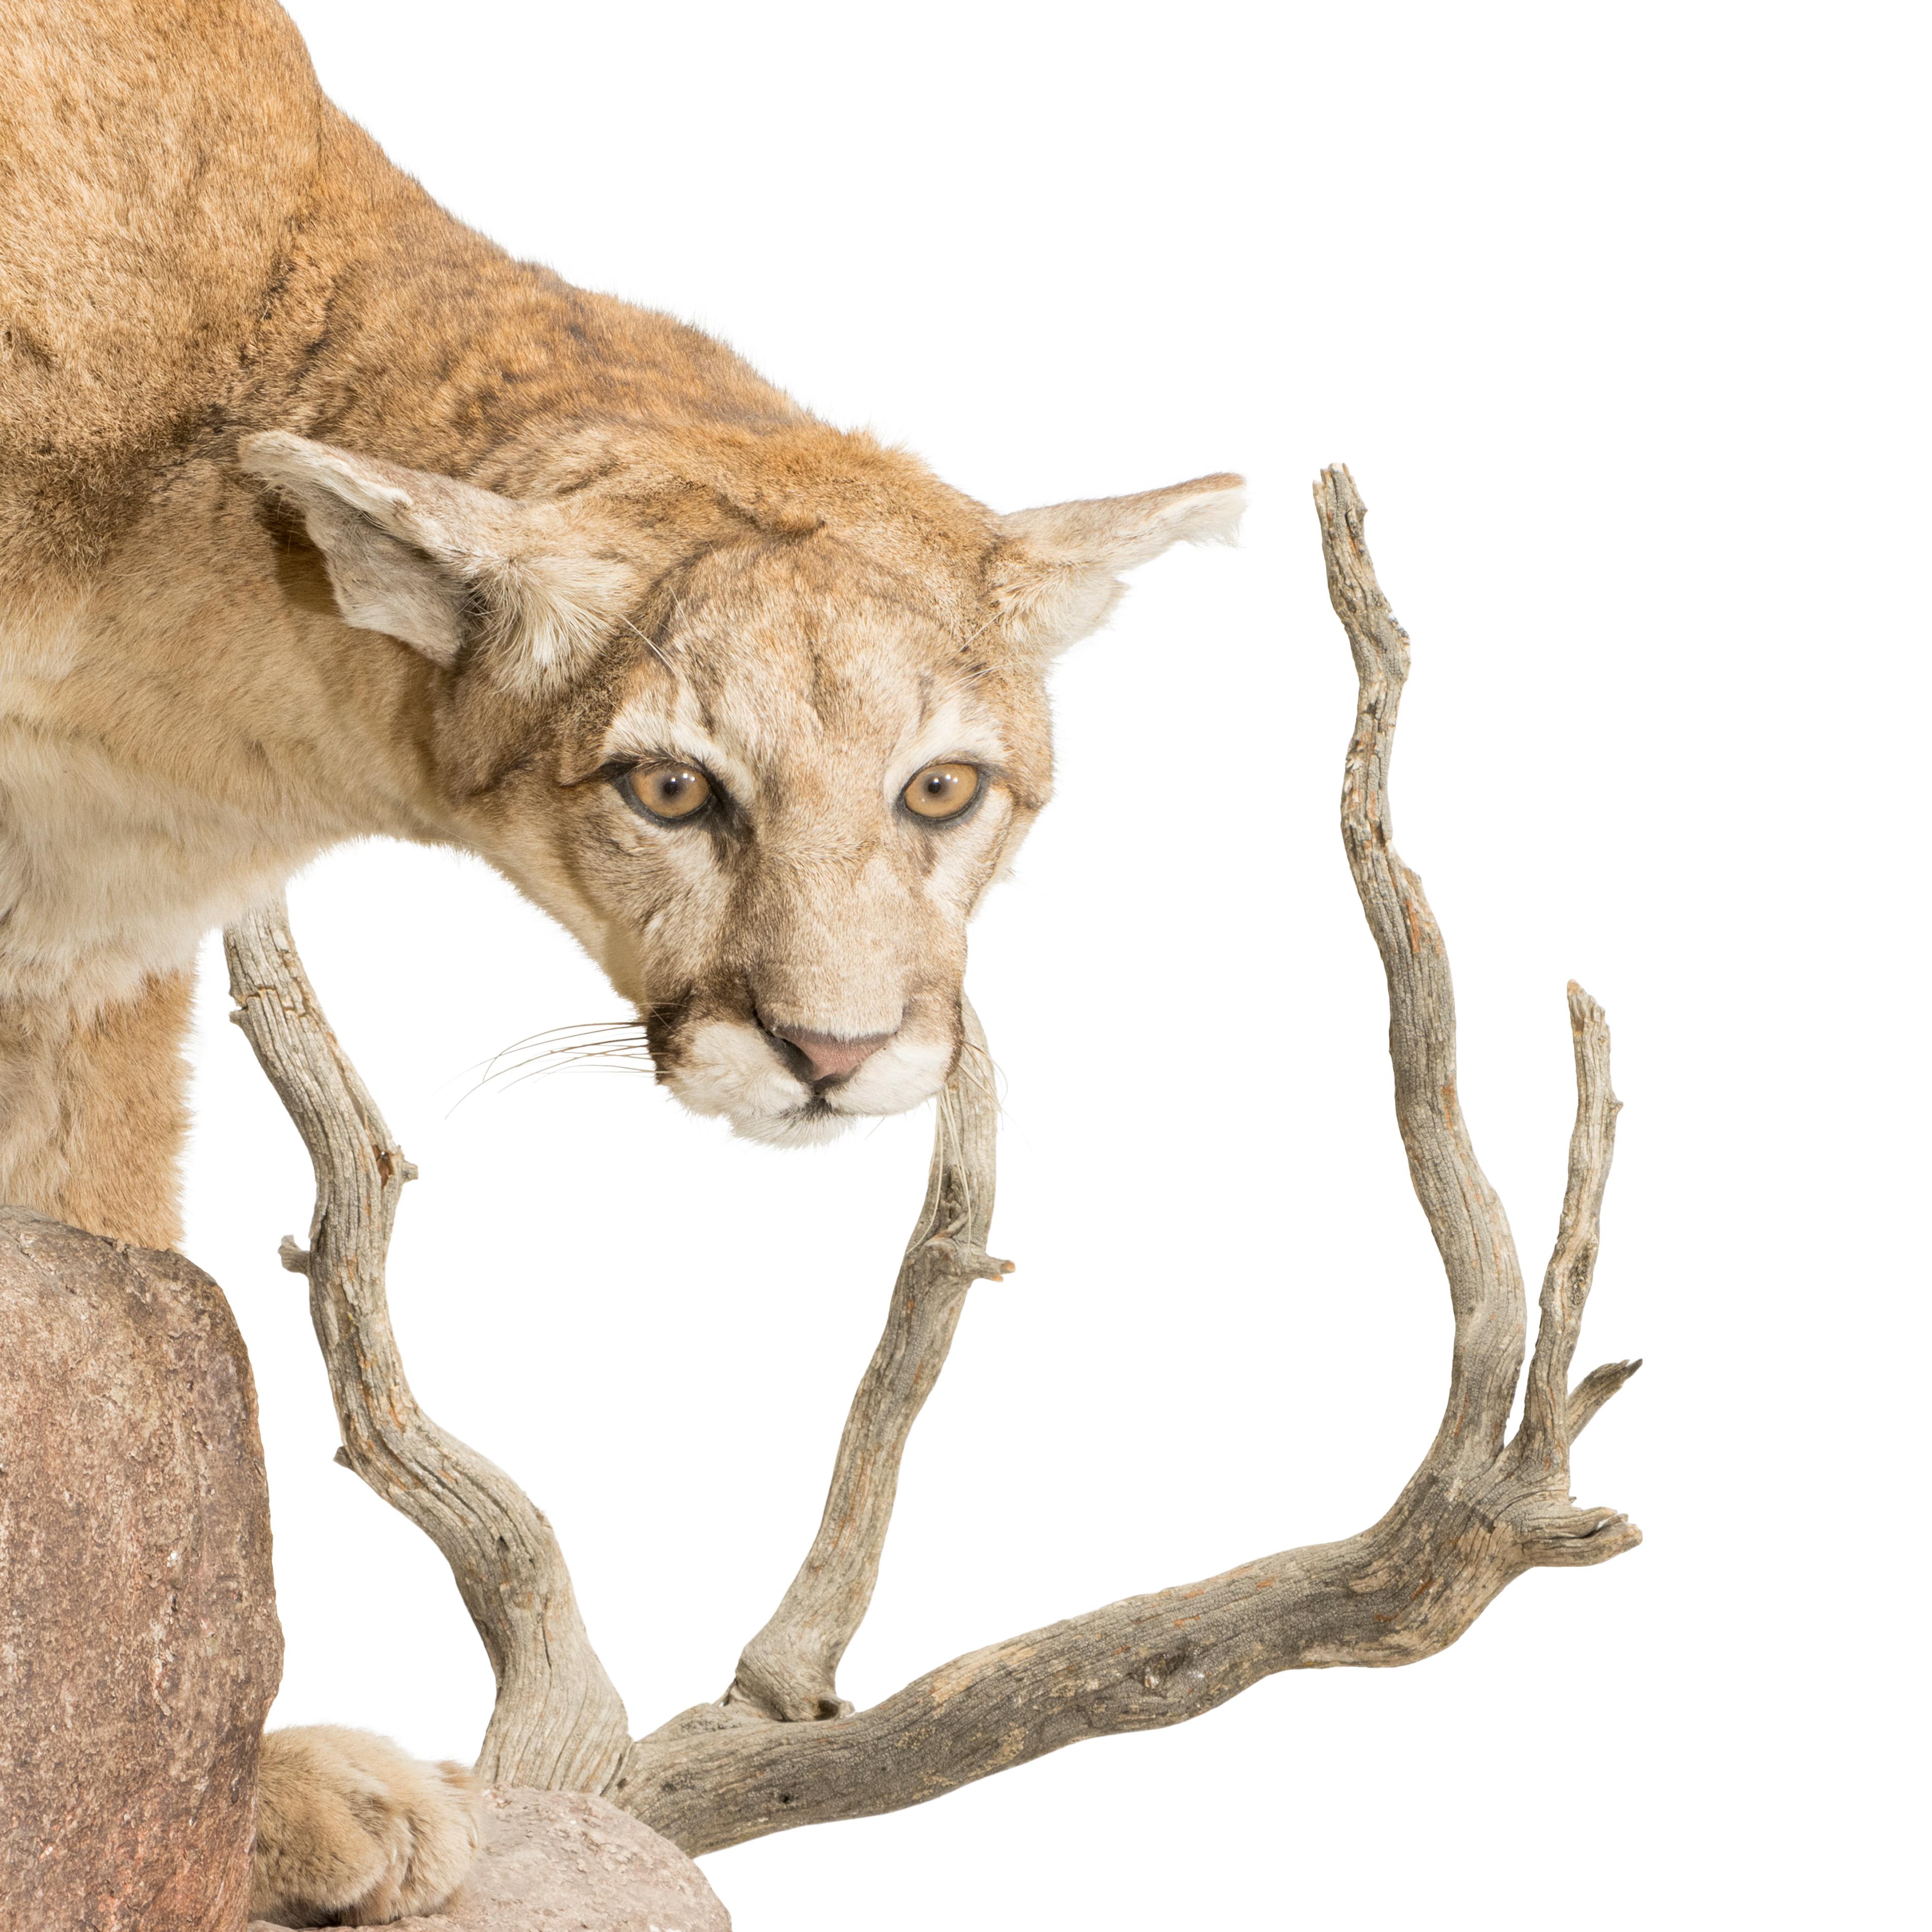 North Idaho cougar mount on faux stone wall mount base.

PERIOD: Contemporary
ORIGIN: Colorado, United States
SIZE: 39